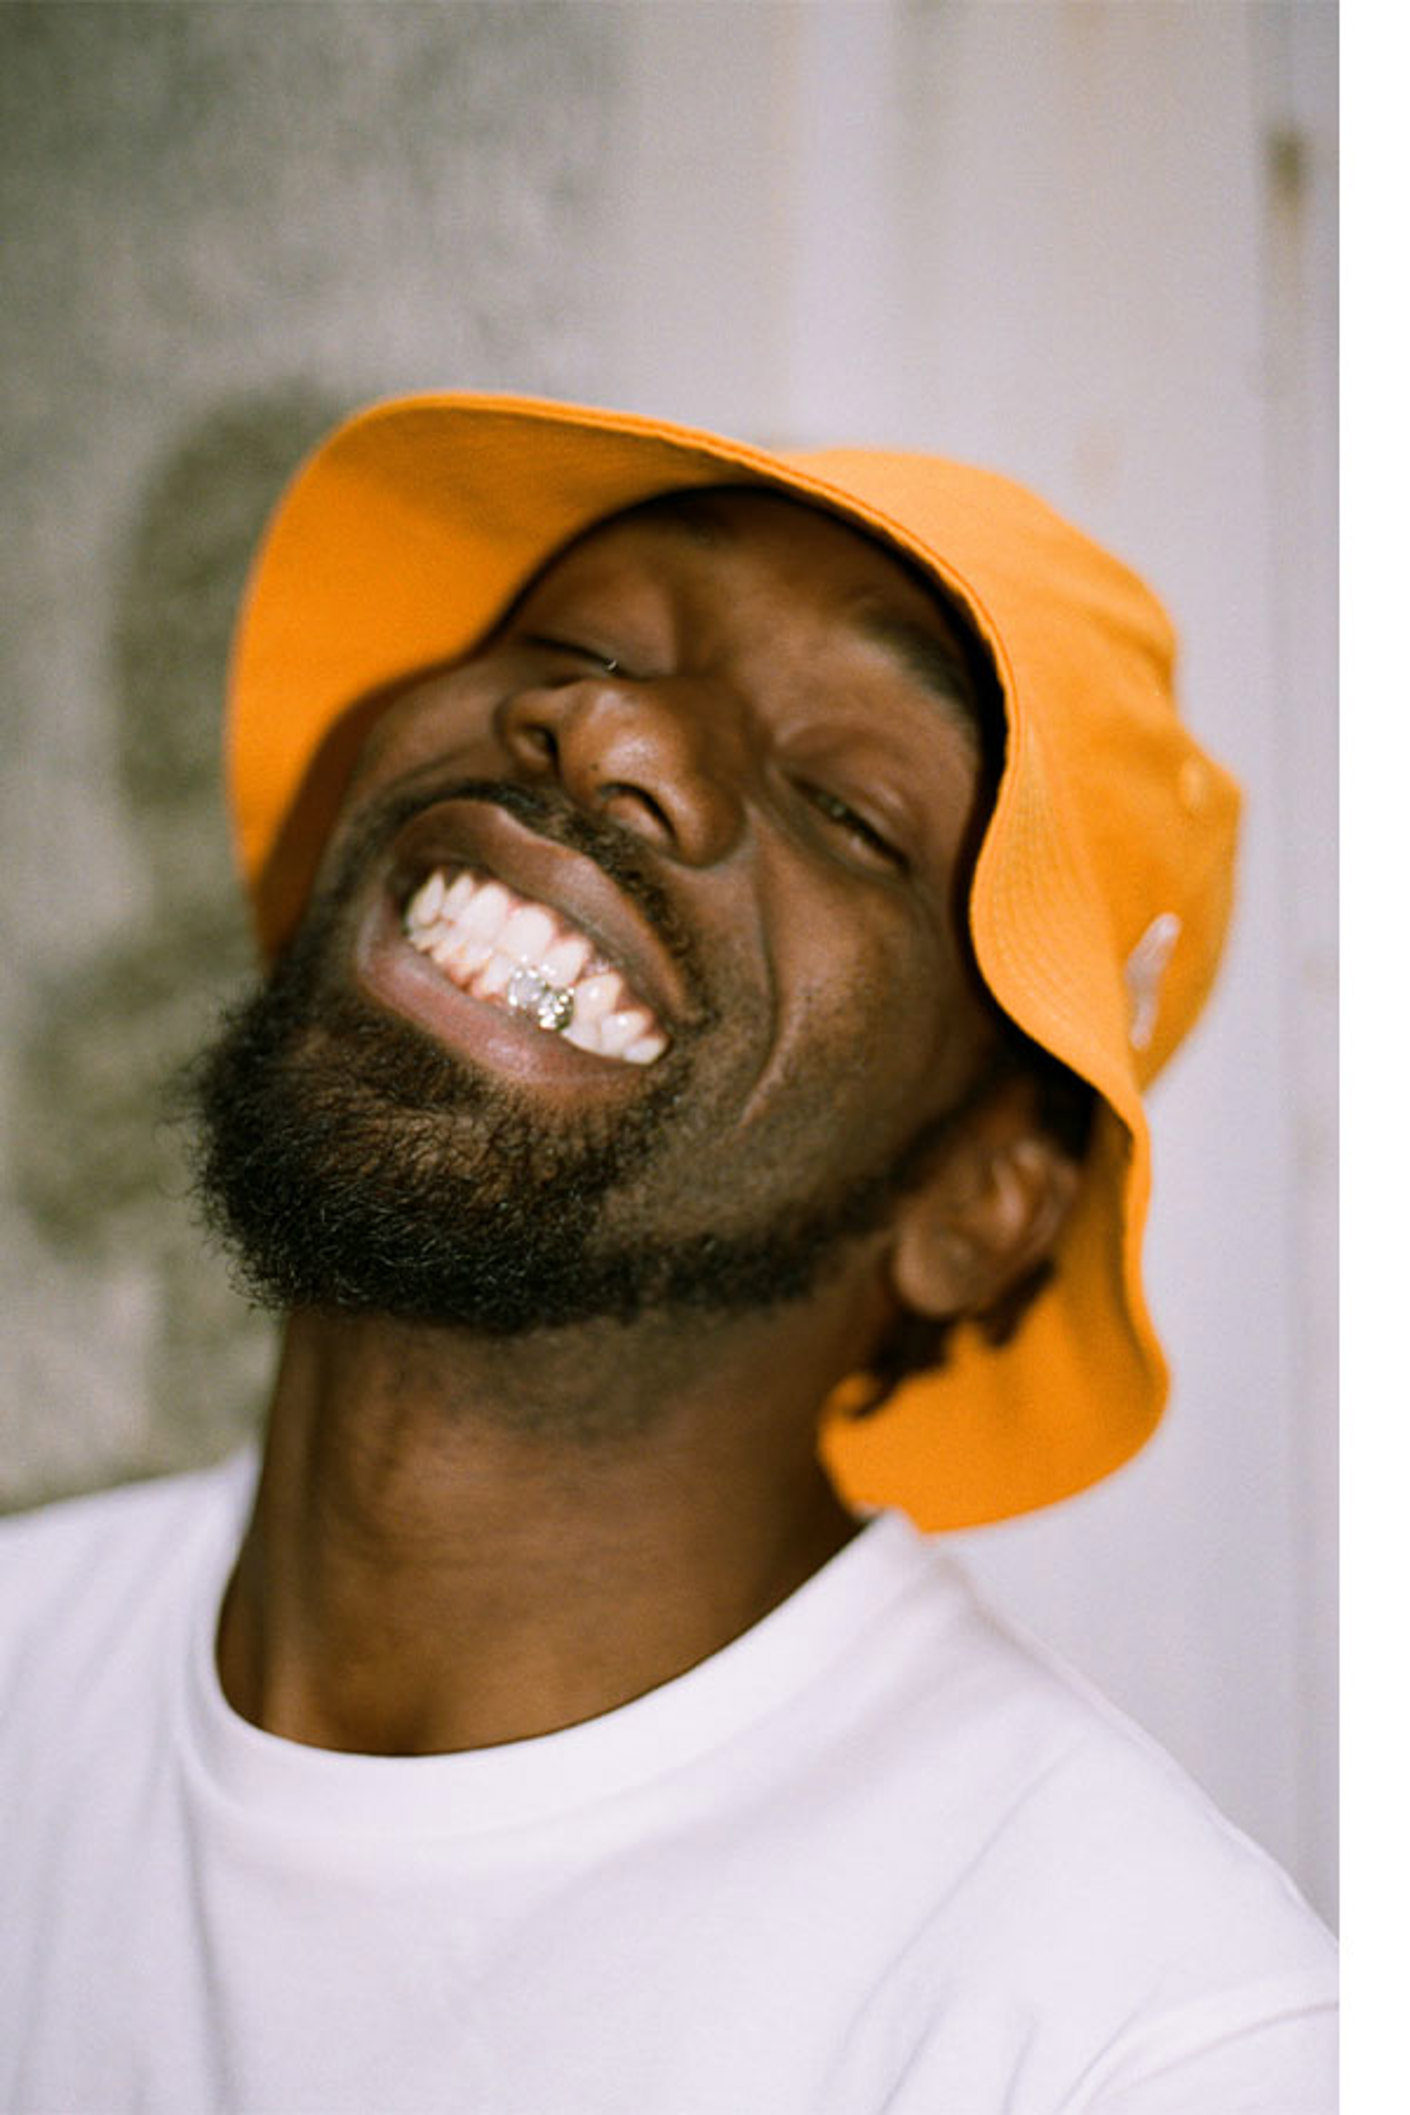 French rapper, Tedax Max, wearing a New Era bucket hat and smiling